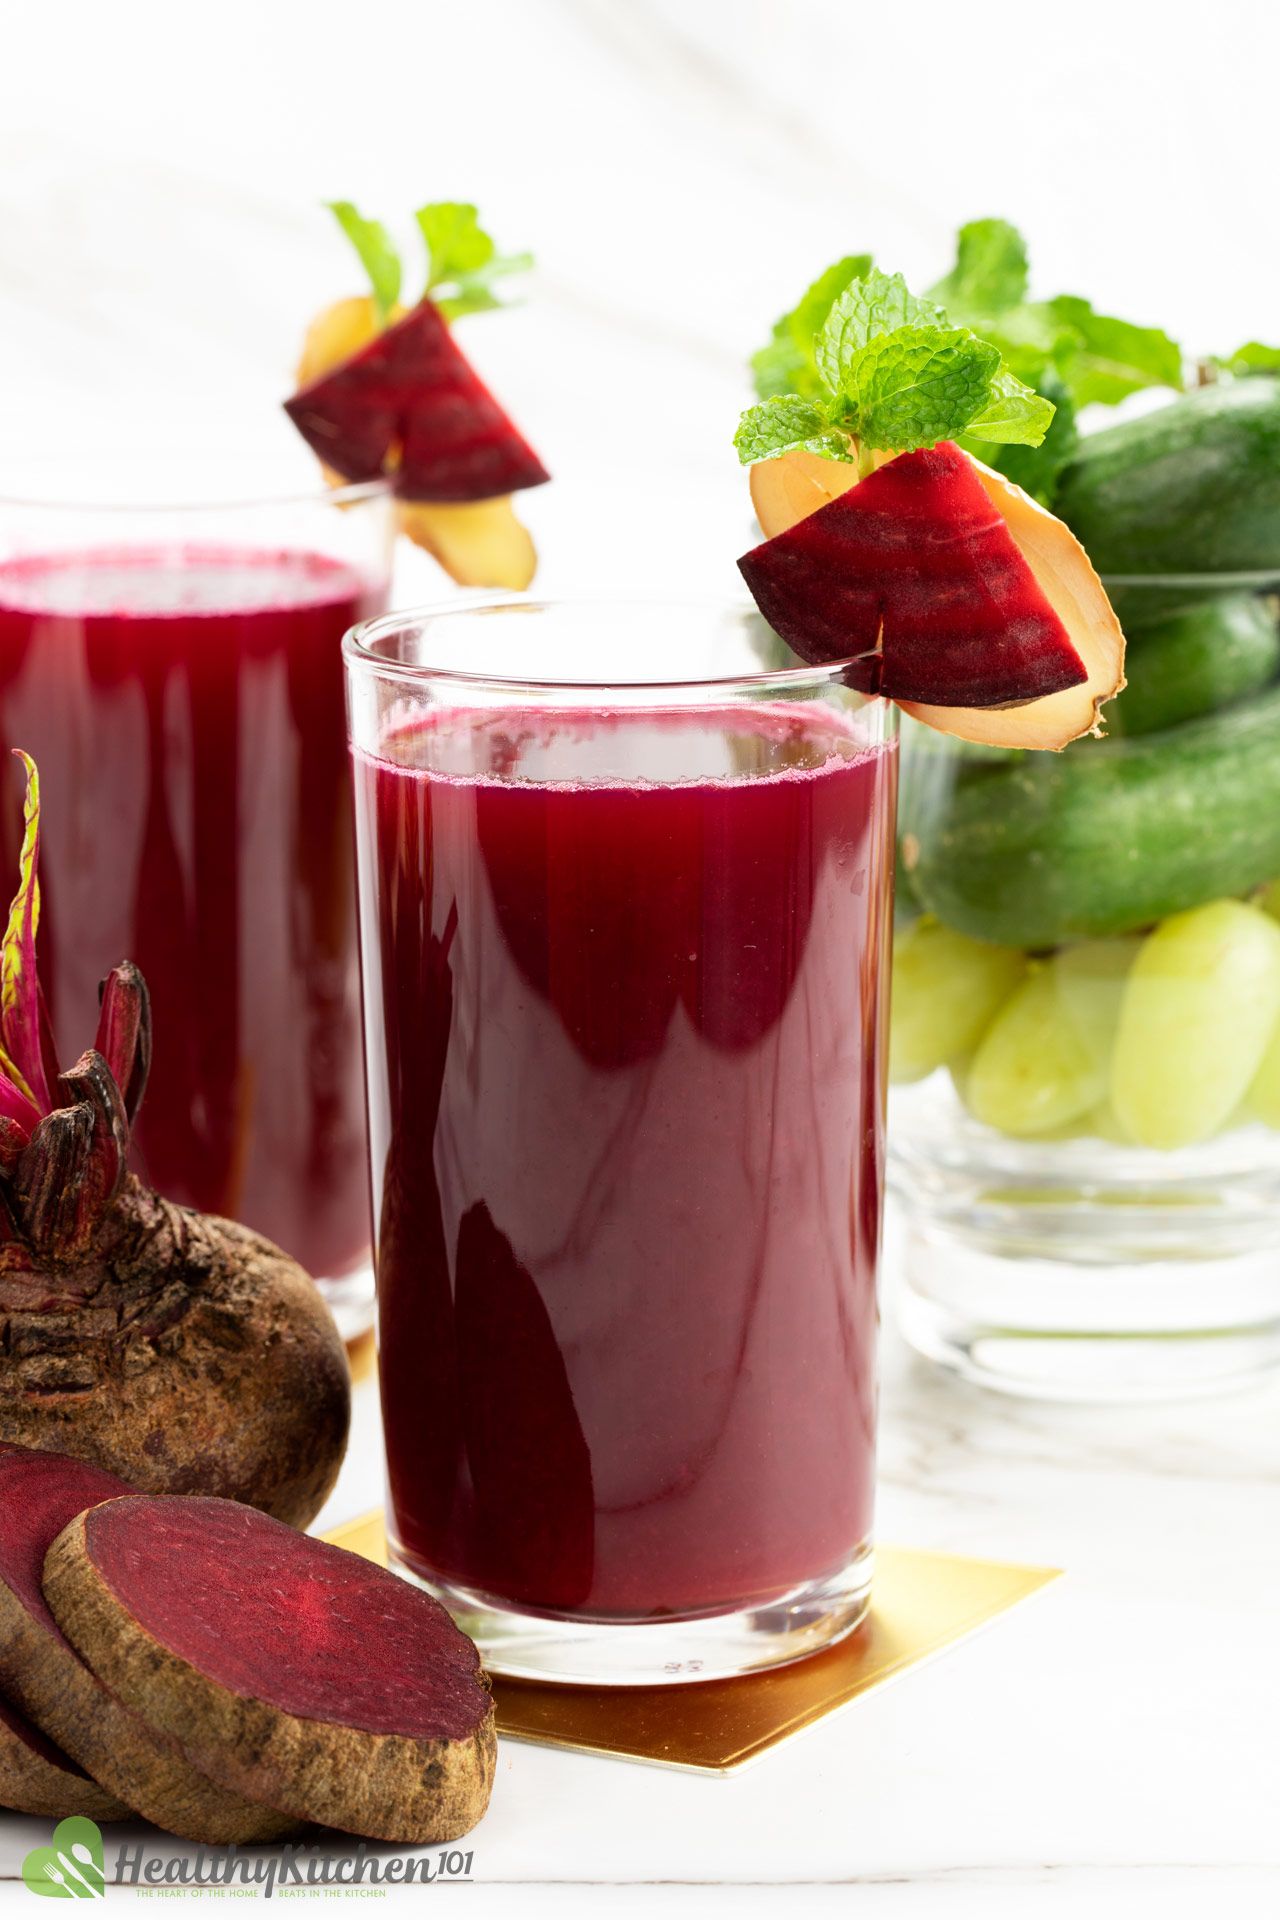 Is Ginger Beet Juice good for you